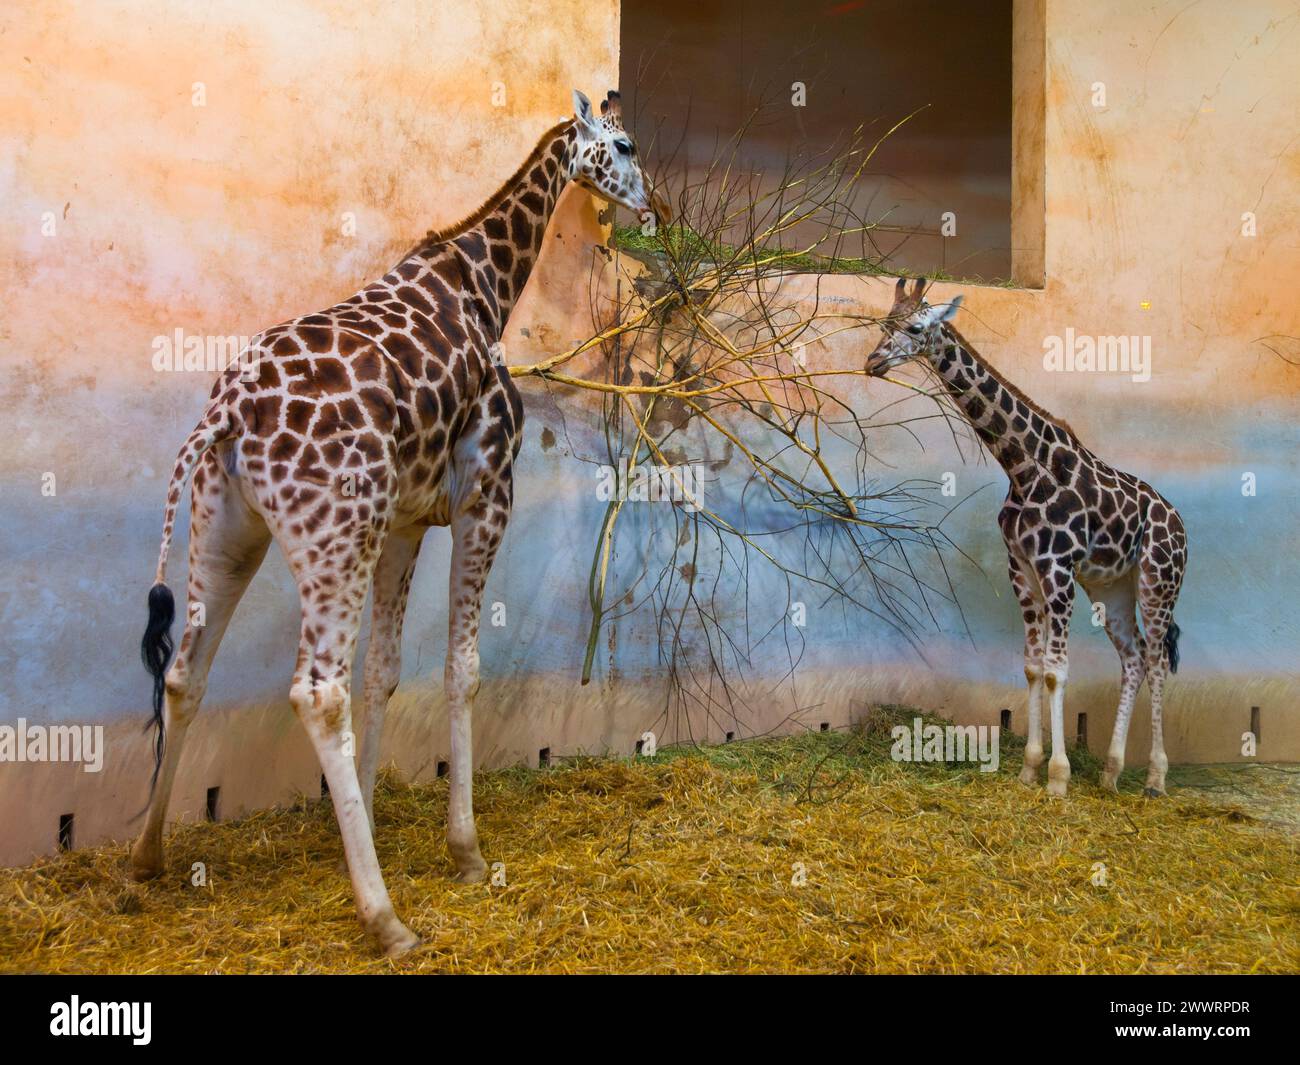 Two giraffes eating in the zoo, indoor photo Stock Photo